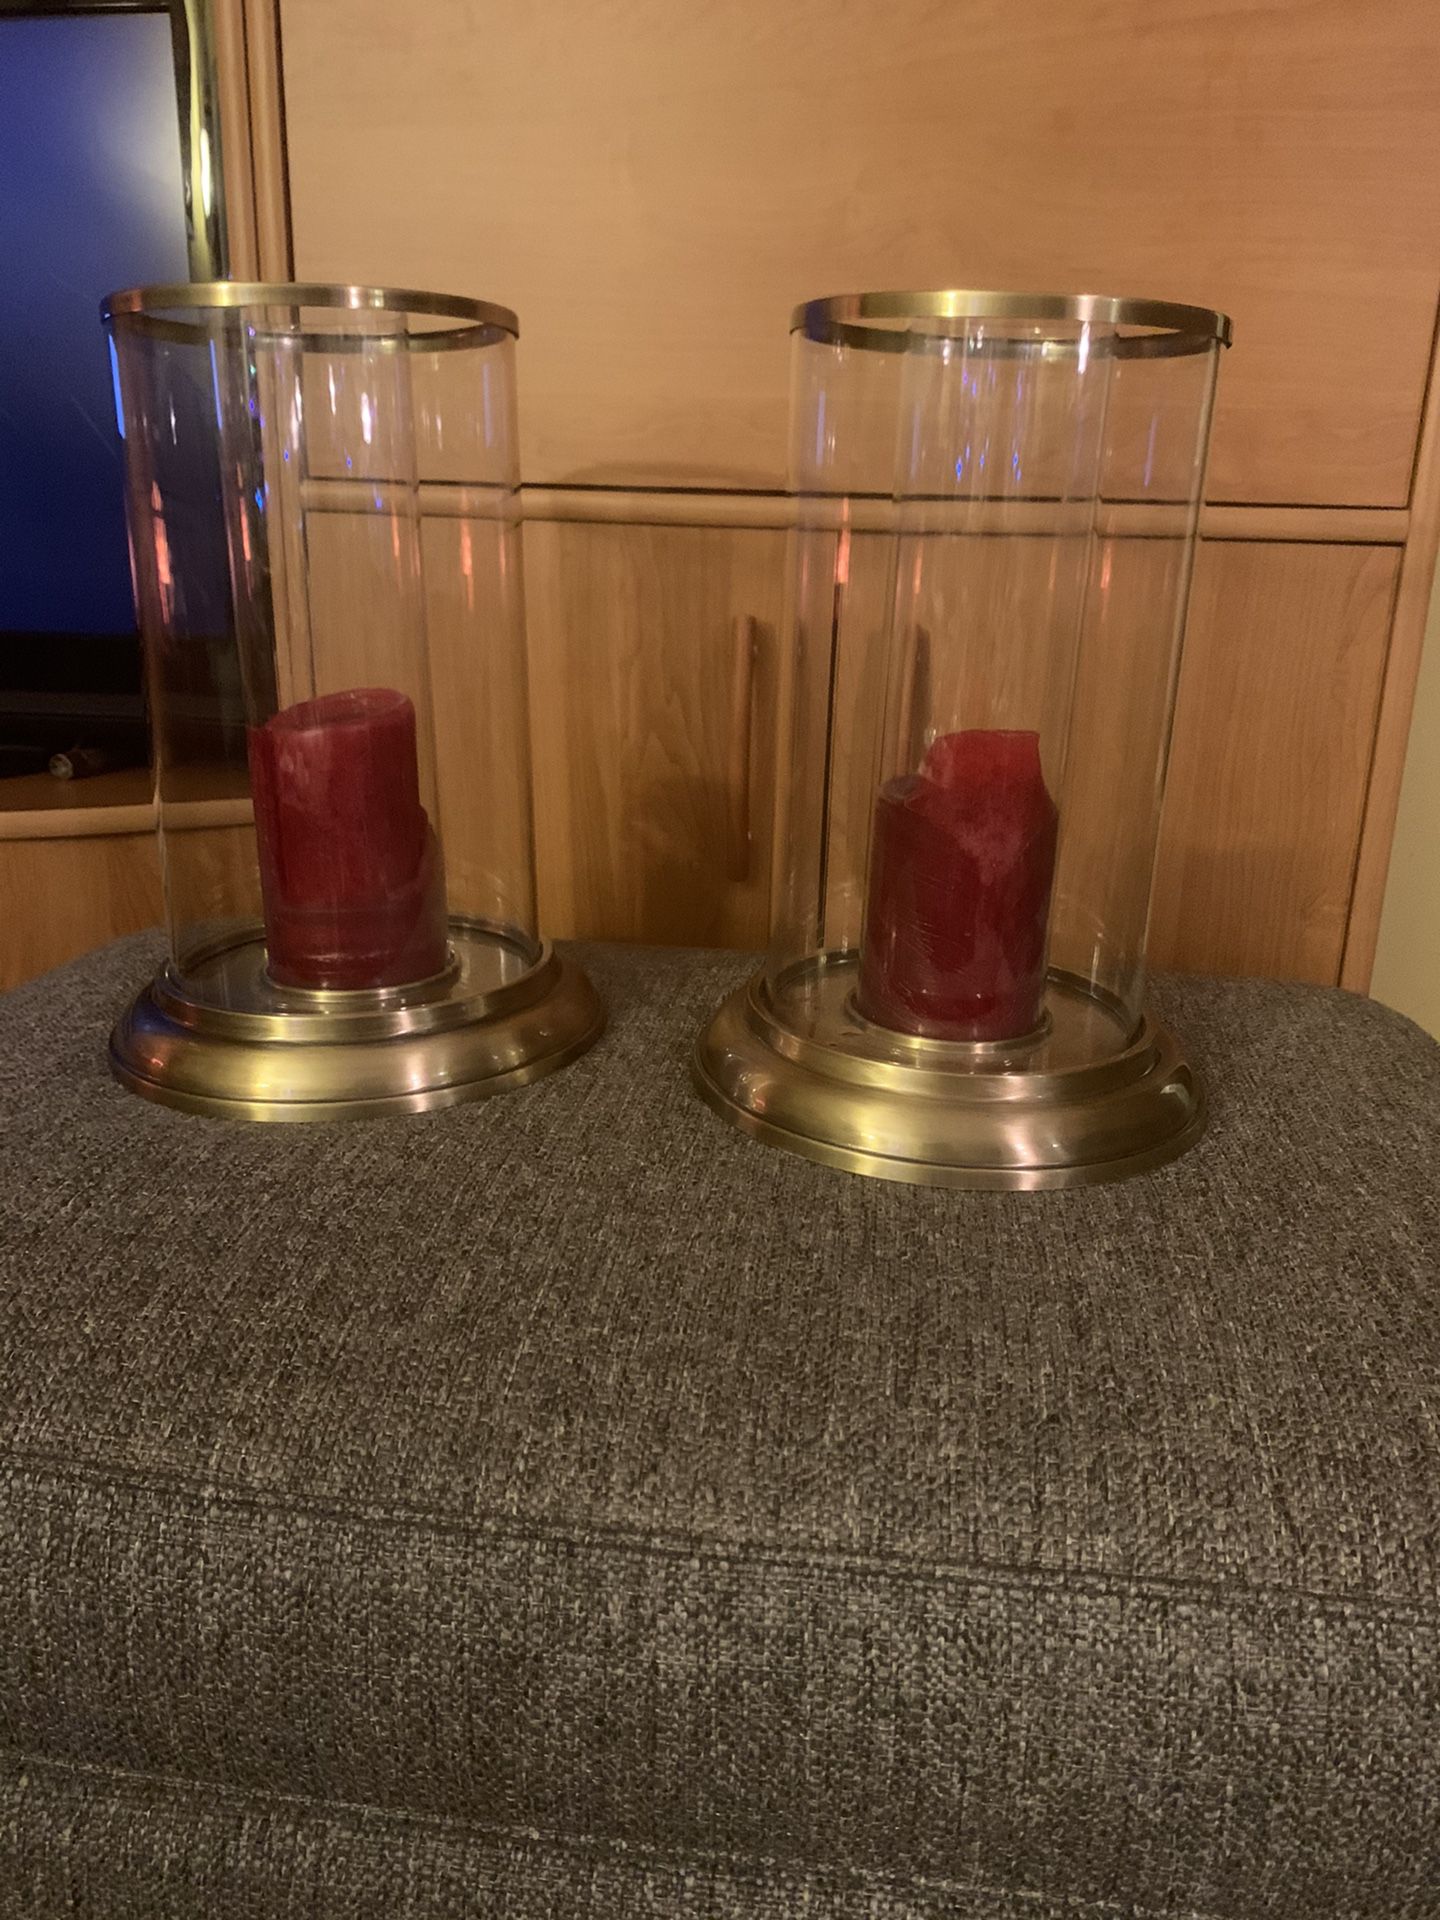 Free candle holders